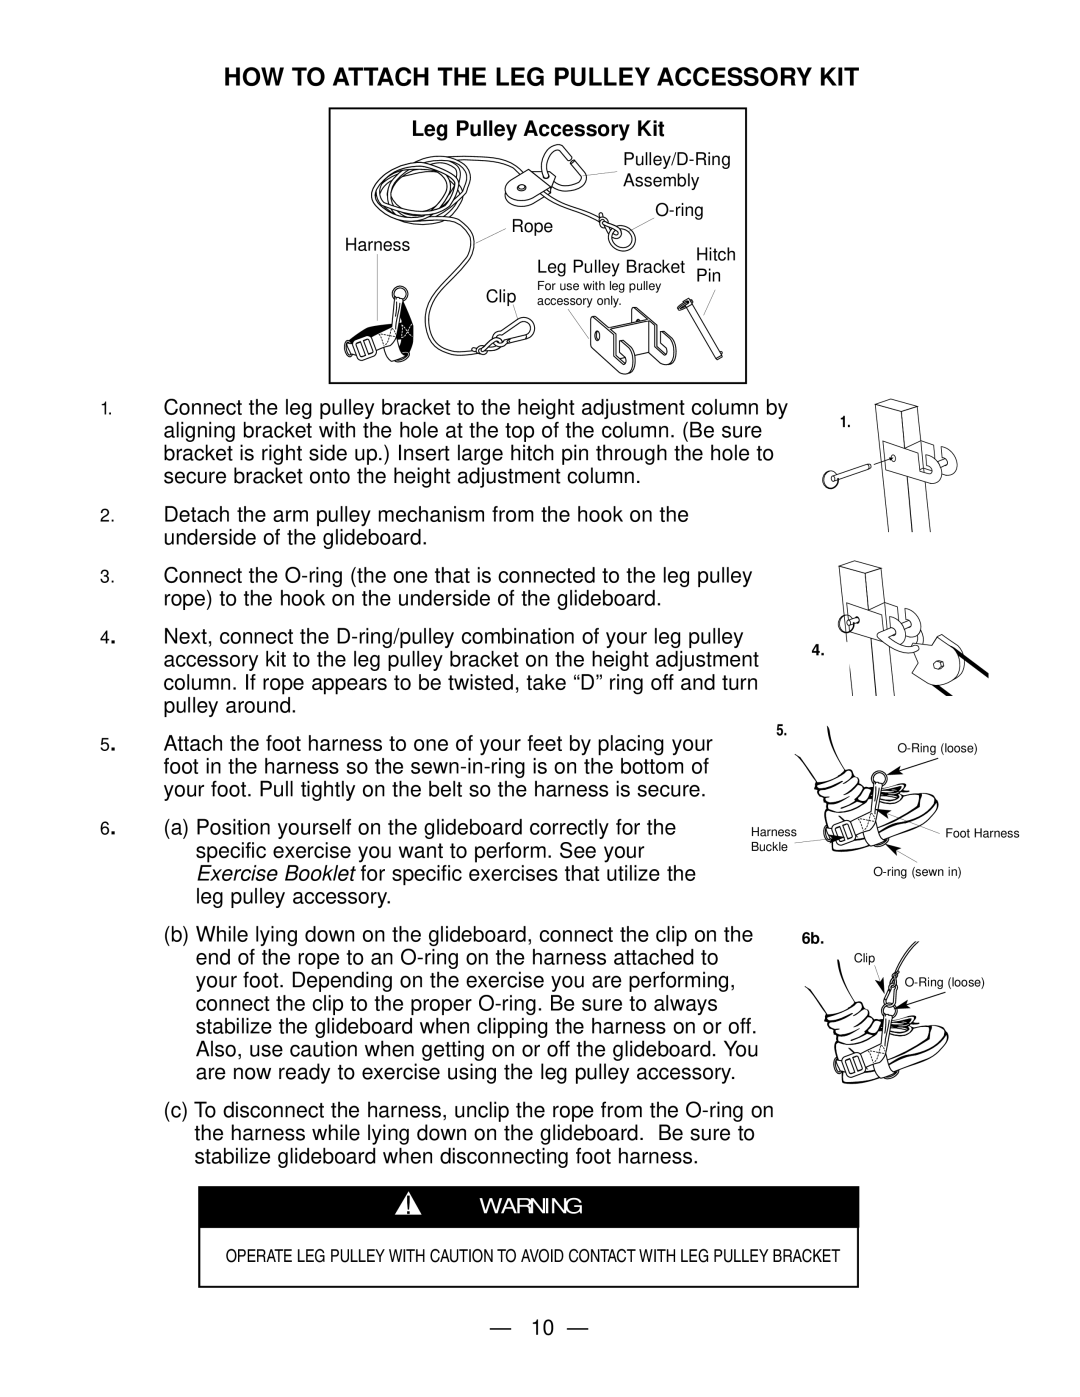 Fitness Quest Gym1000 manual How To Attach The Leg Pulley Accessory Kit 